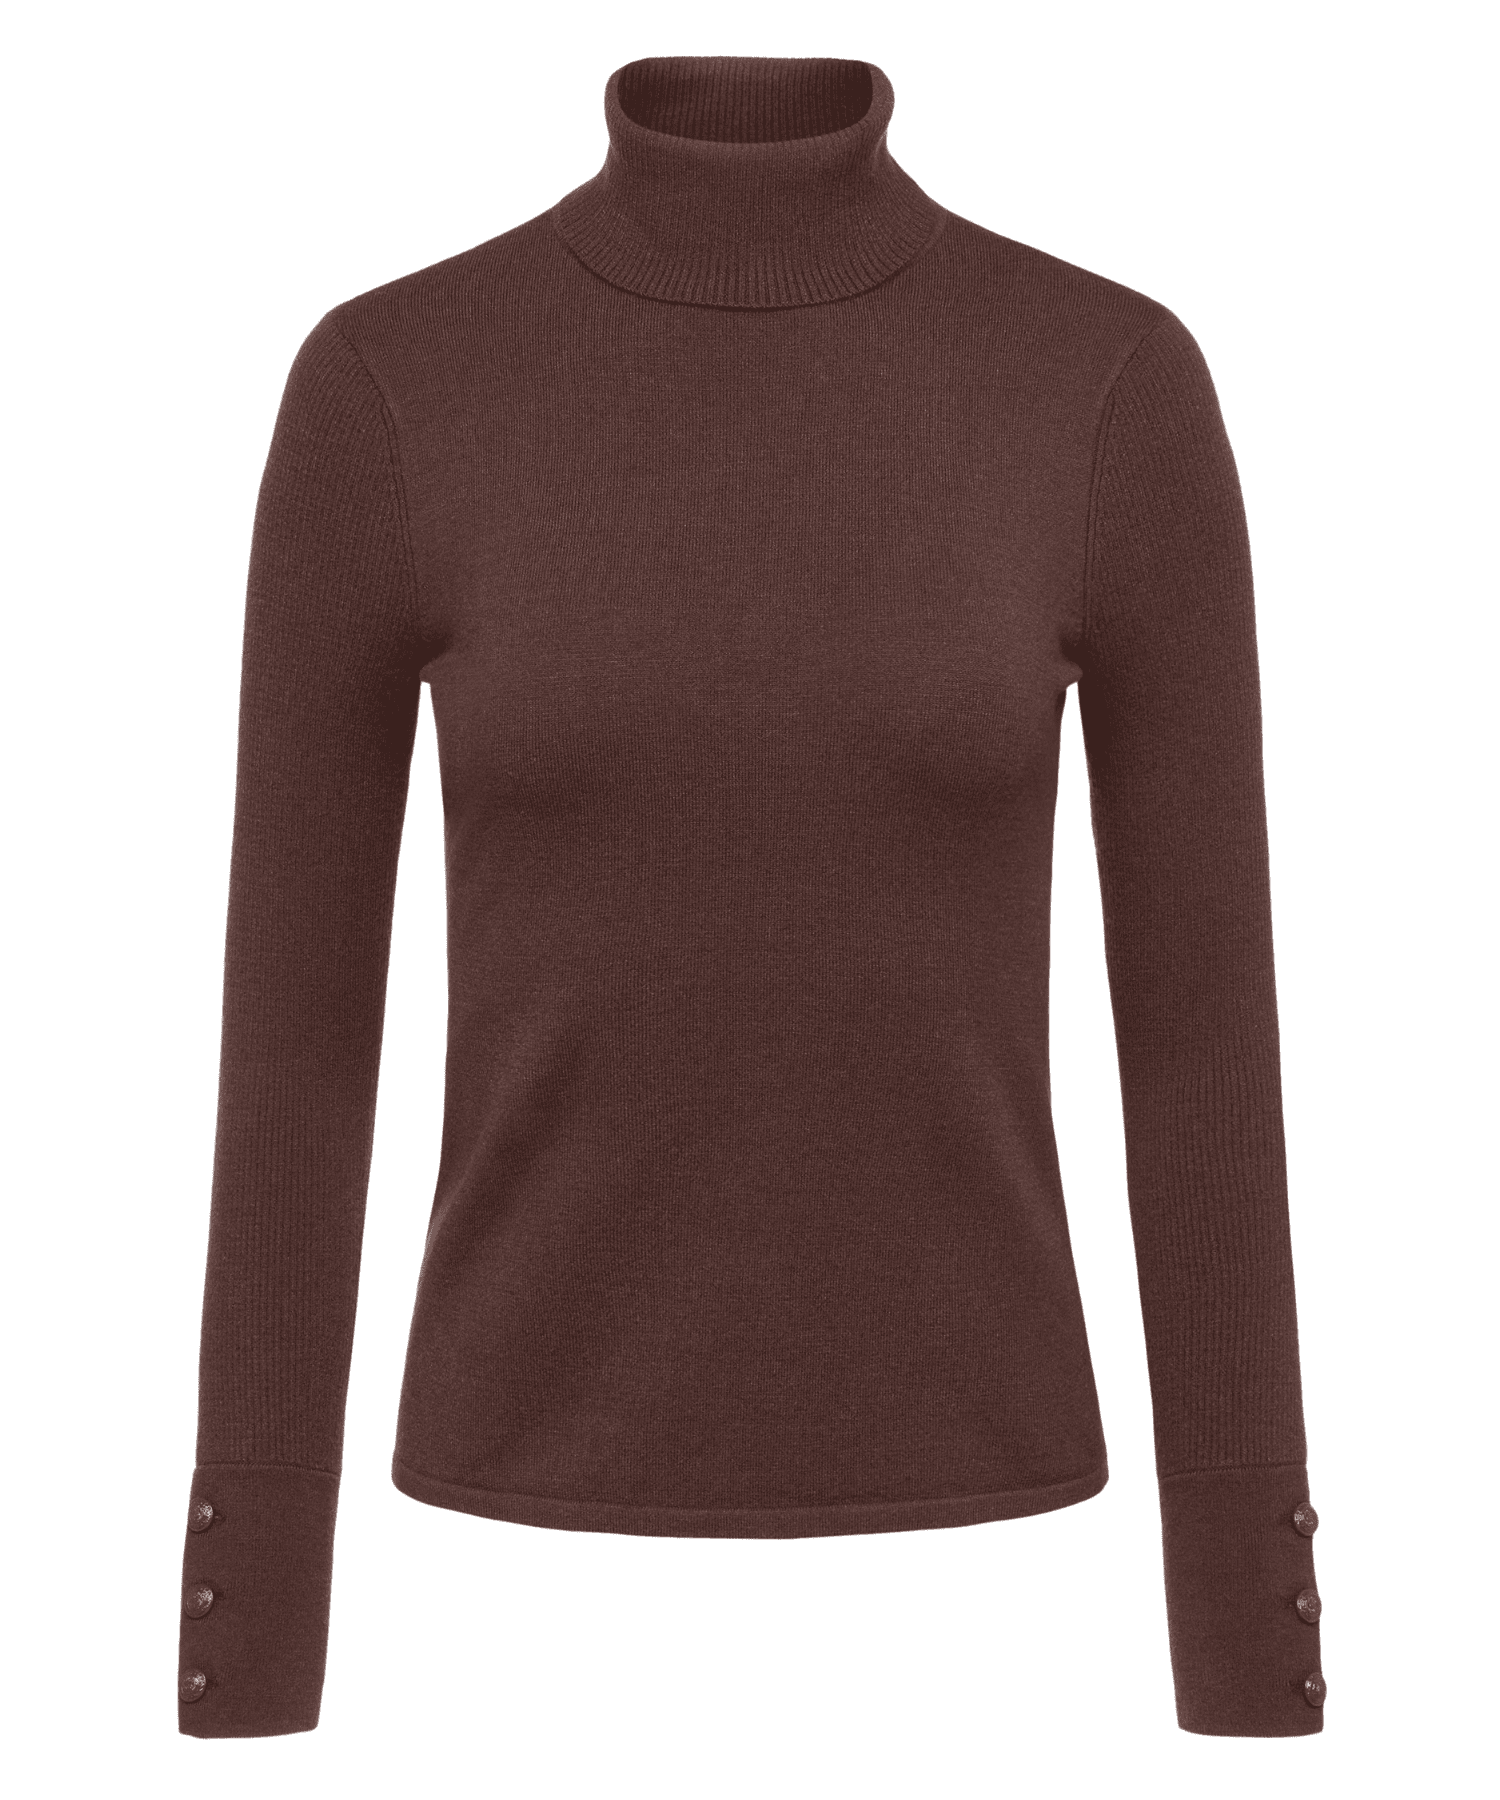 L'Agence Chocolate Odette Sweater